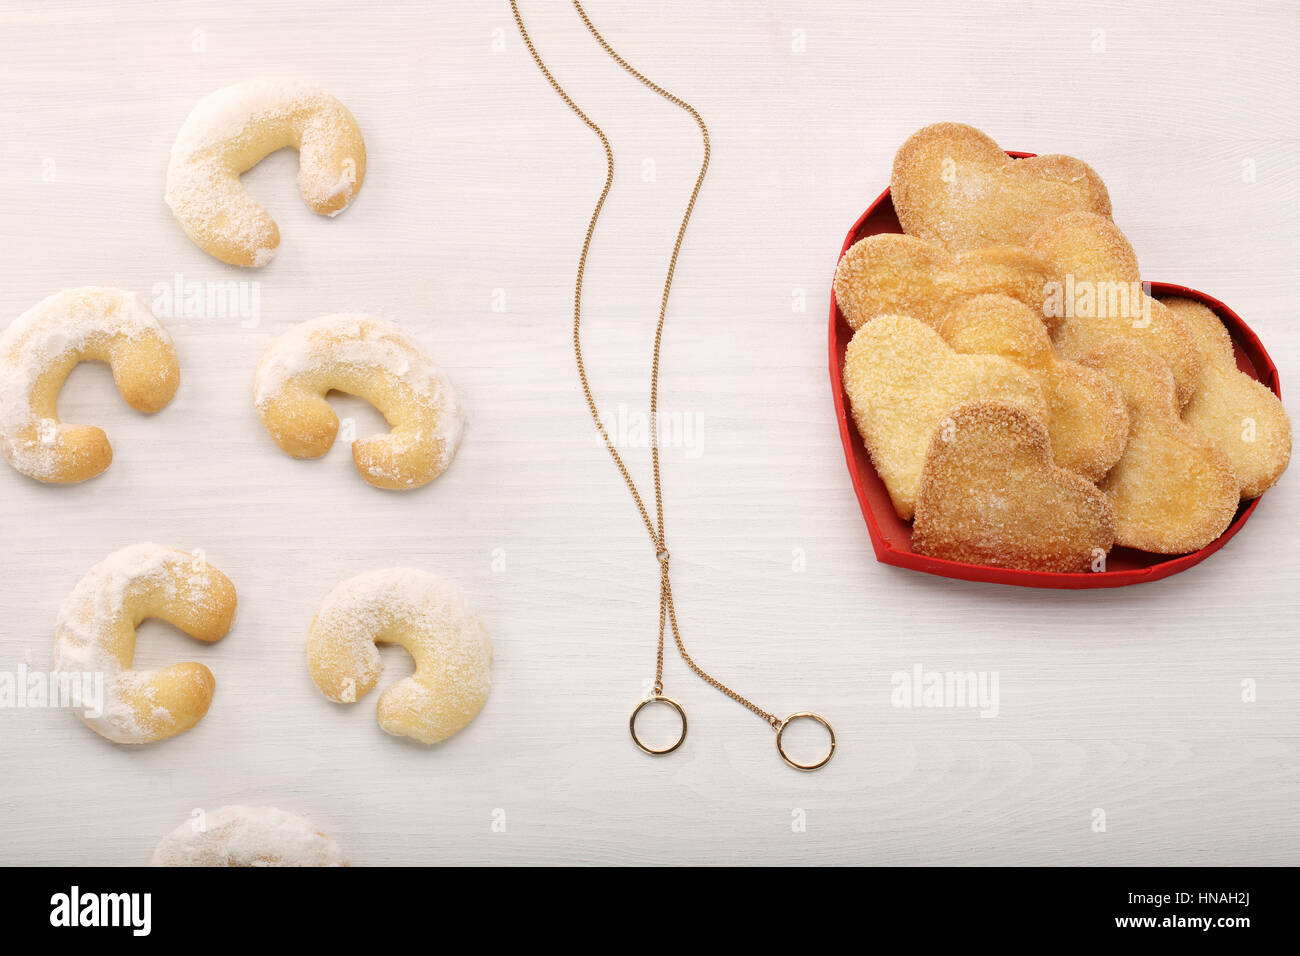 Delicious crunchy cookie in hearts shapes and necklace with wedding rings Stock Photo